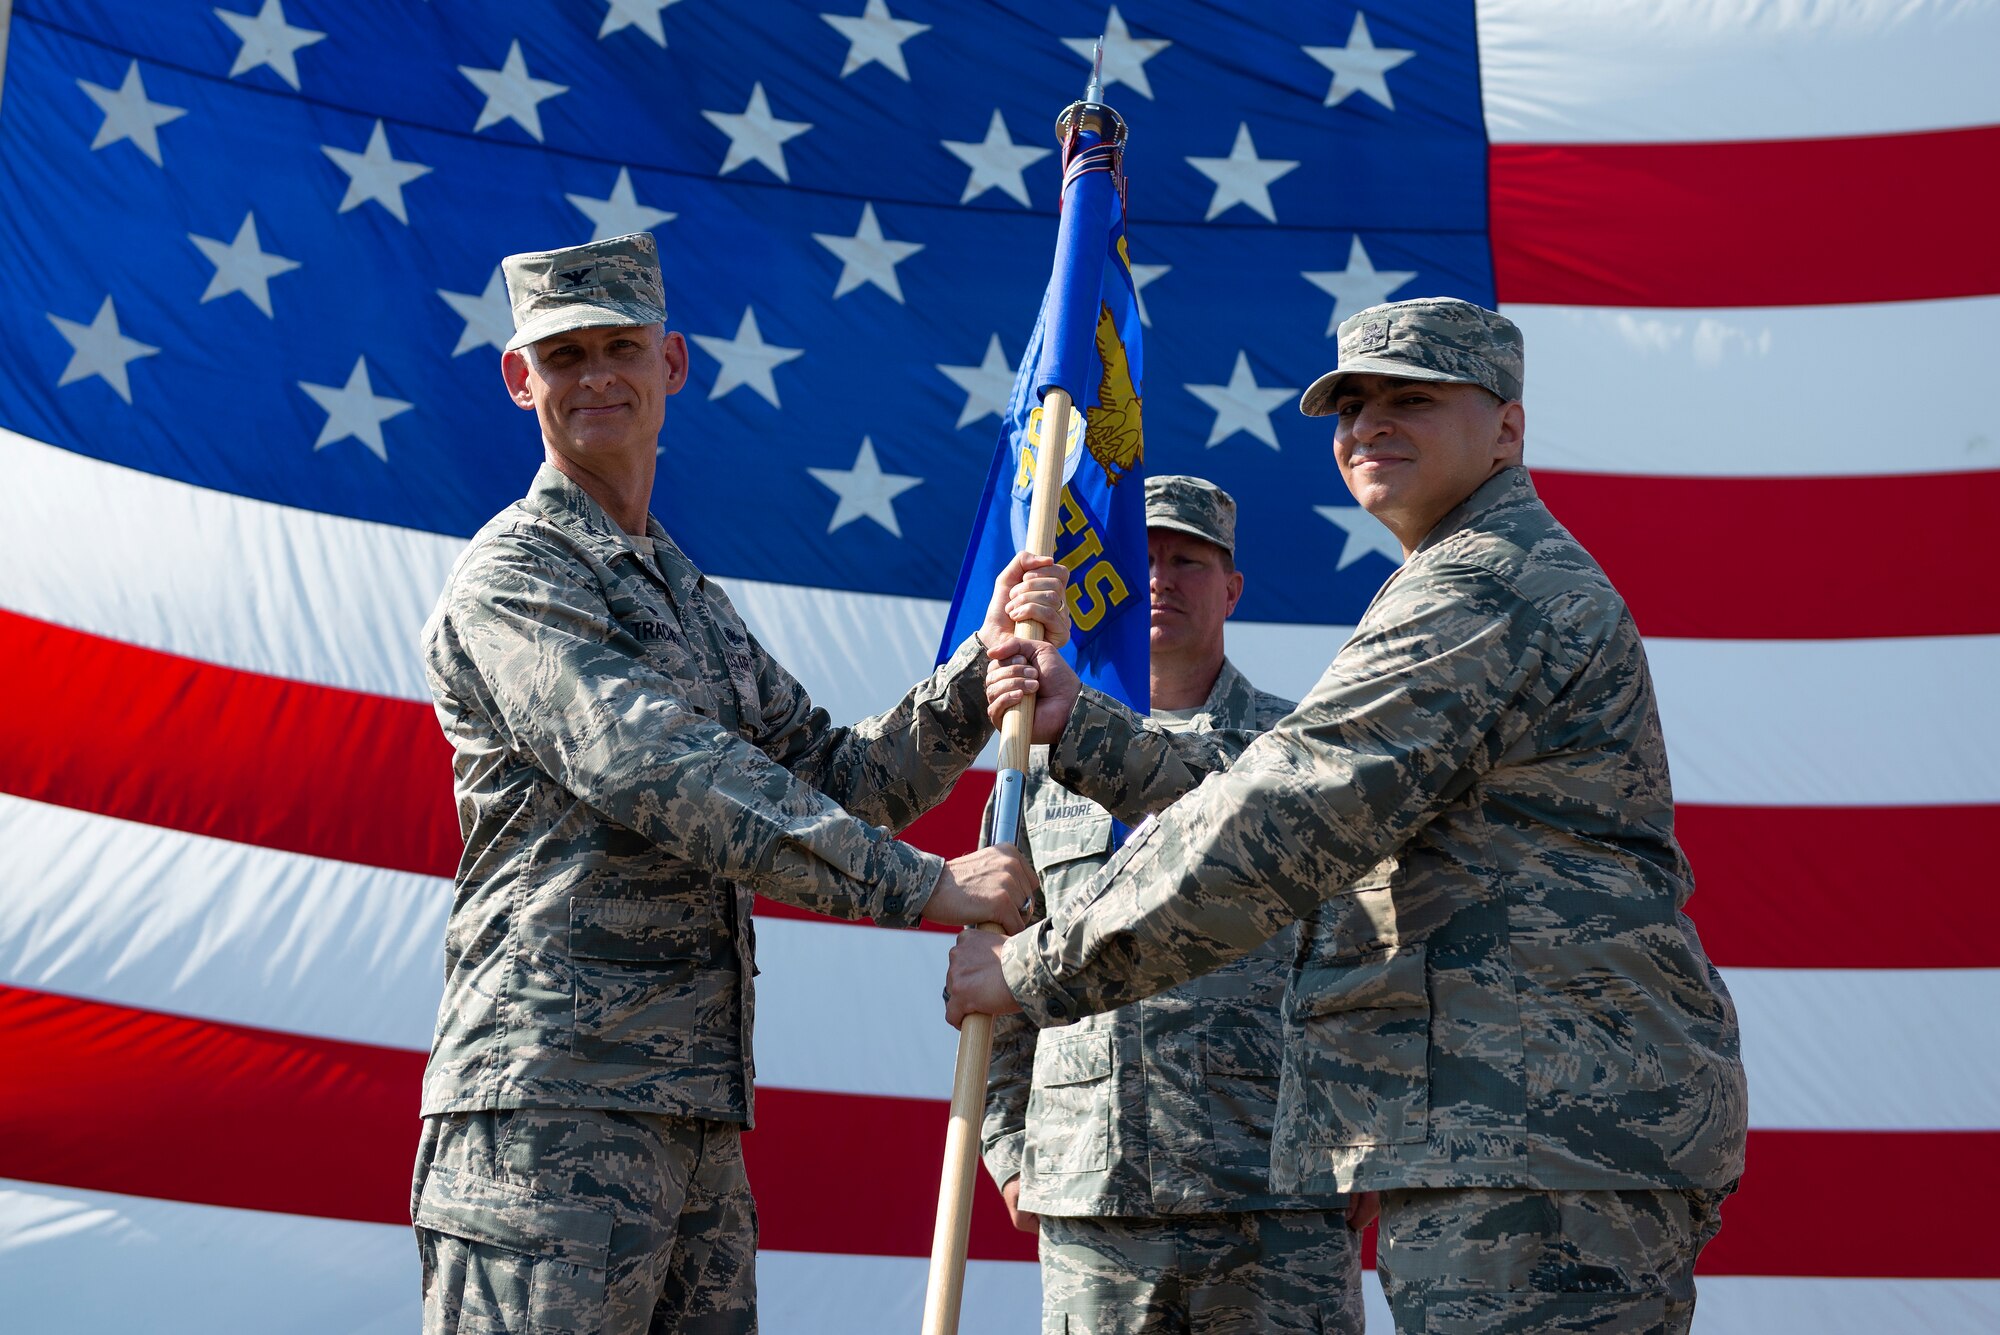 U.S. Air Force Col. James Trachier, 38th Cyberspace Engineering Installation Group commander, passes the guidon to Lt. Col. Nelson Caraballo, 85th Engineering Installation Squadron commander, during a change of command ceremony outside Maltby Hall on Keesler Air Force Base, Mississippi, June 4, 2019. The ceremony is a symbol of command being exchanged from one commander to the next. "I look forward to caring for and leading the Airmen of the 85th EIS while we deploy worldwide to engineer and install world-class capabilities," said Caraballo. (U.S. Air Force photo by Airman 1st Class Kimberly L. Mueller)